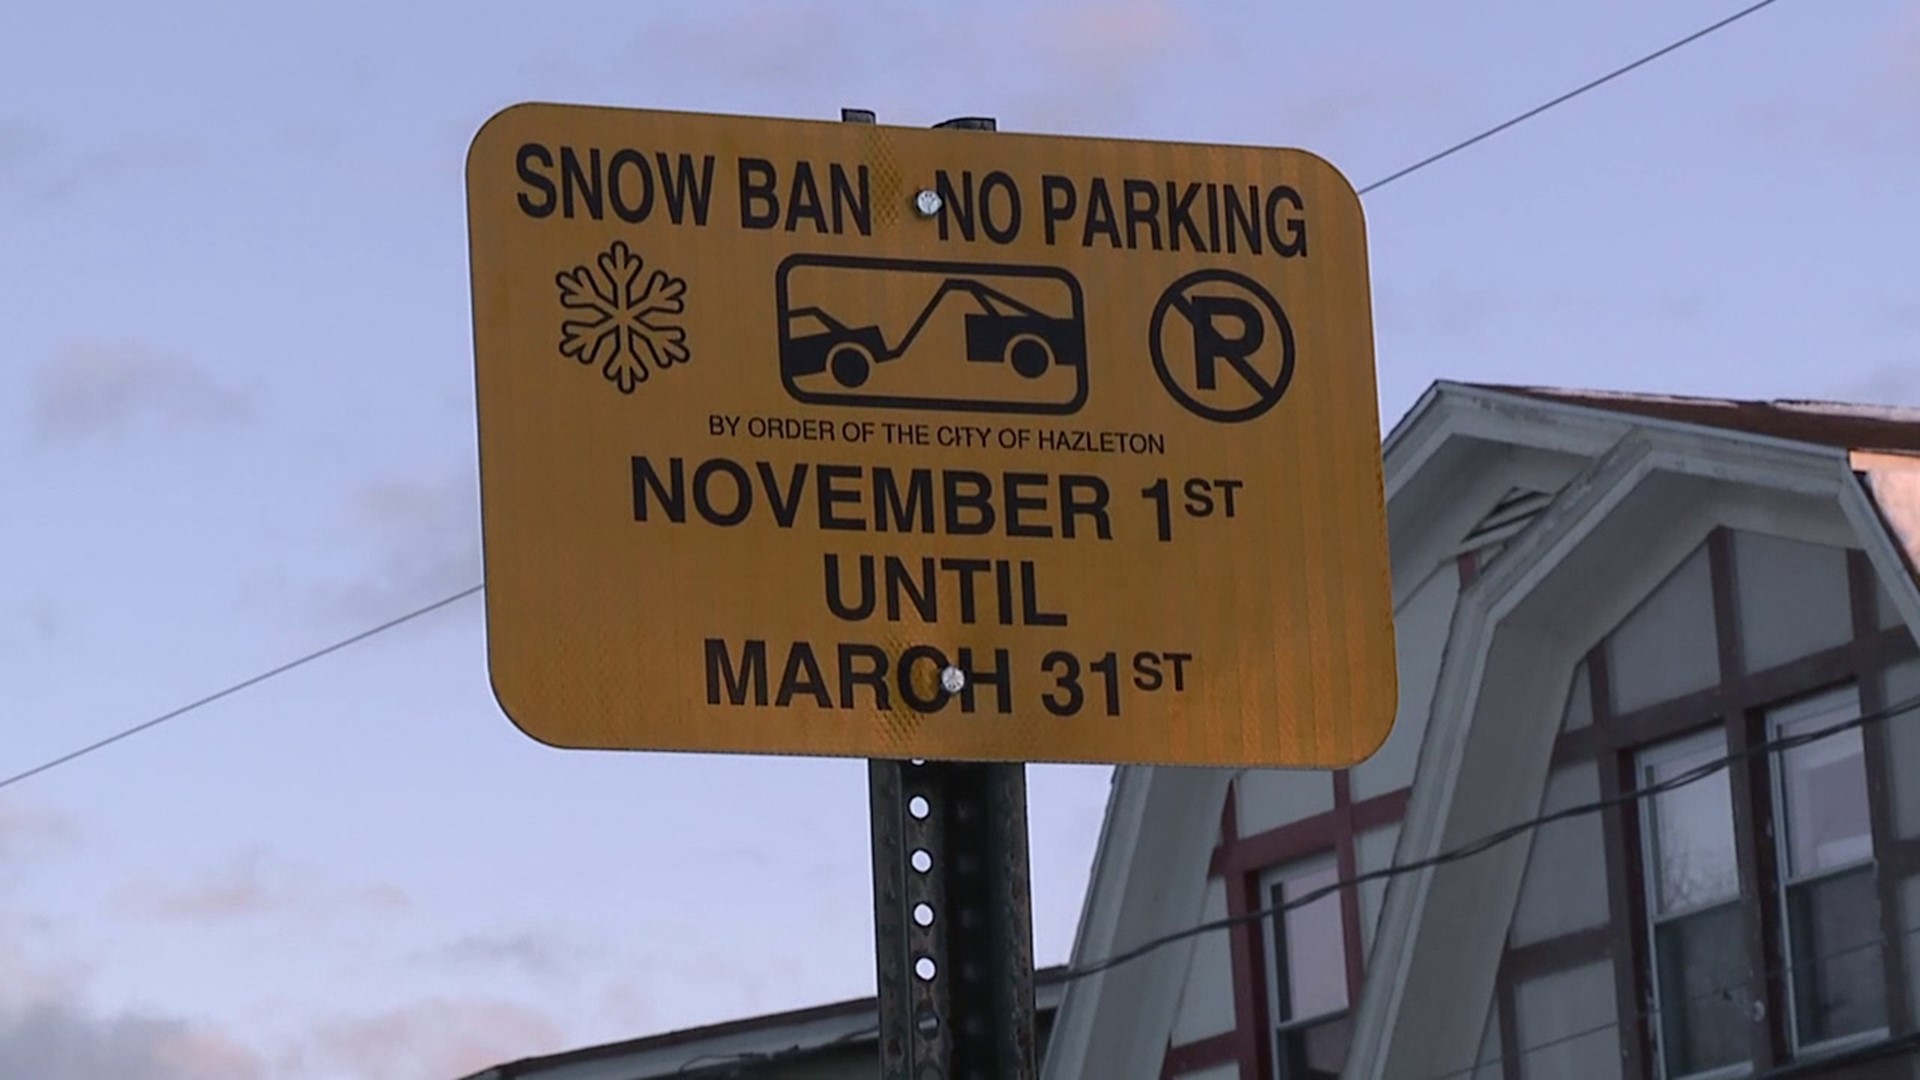 It's a recurring annoyance in the City of Hazleton. Hundreds woke up to parking tickets on their windshields following a weekend winter storm.